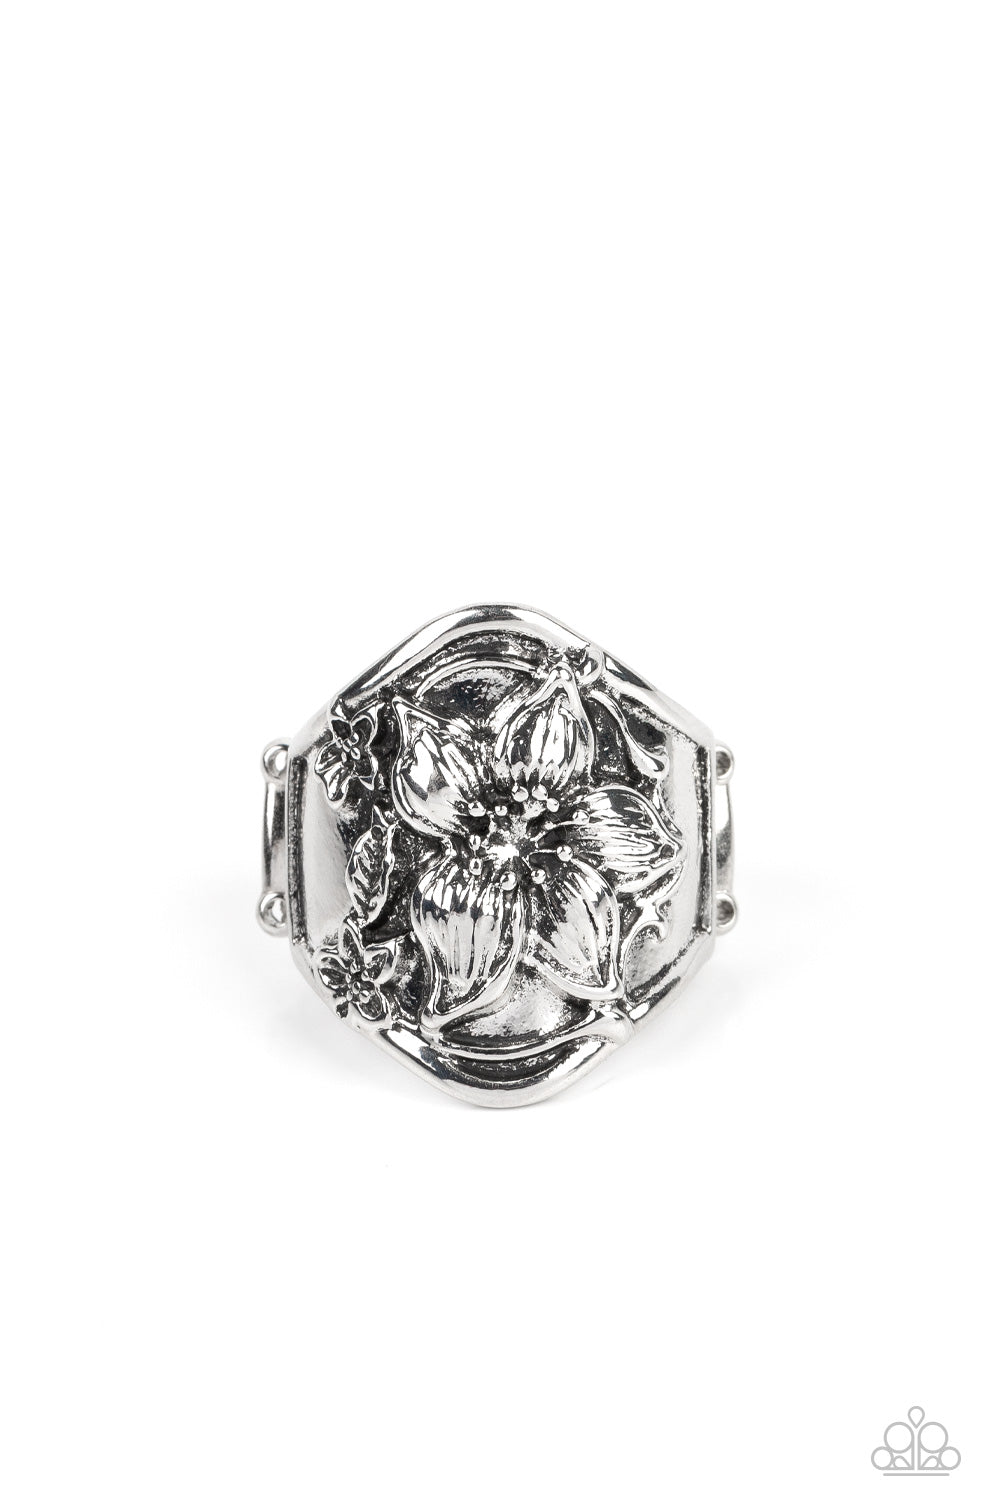 five-dollar-jewelry-hibiscus-harbor-silver-ring-paparazzi-accessories